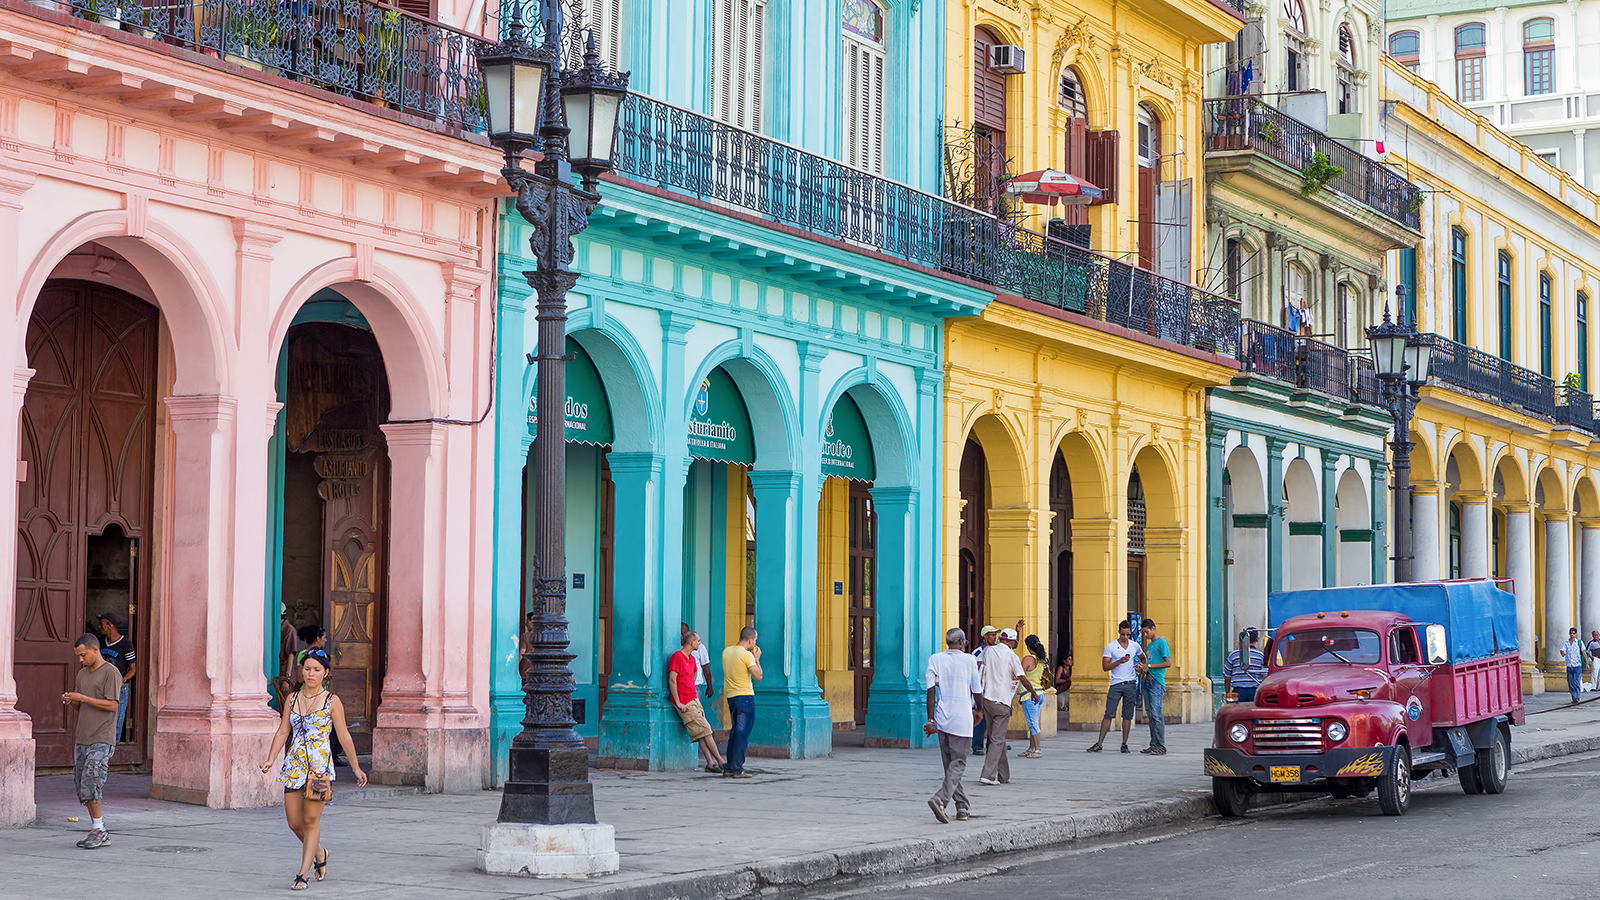 HAVANA-JUNE 21:Typical street scene with people and colorful buildings on June 21, 2013 in Havana.With over 2 million inhabitants Havana is the capital of Cuba and the largest city in the Caribbean; Shutterstock ID 143563039; PO: New Kids Website